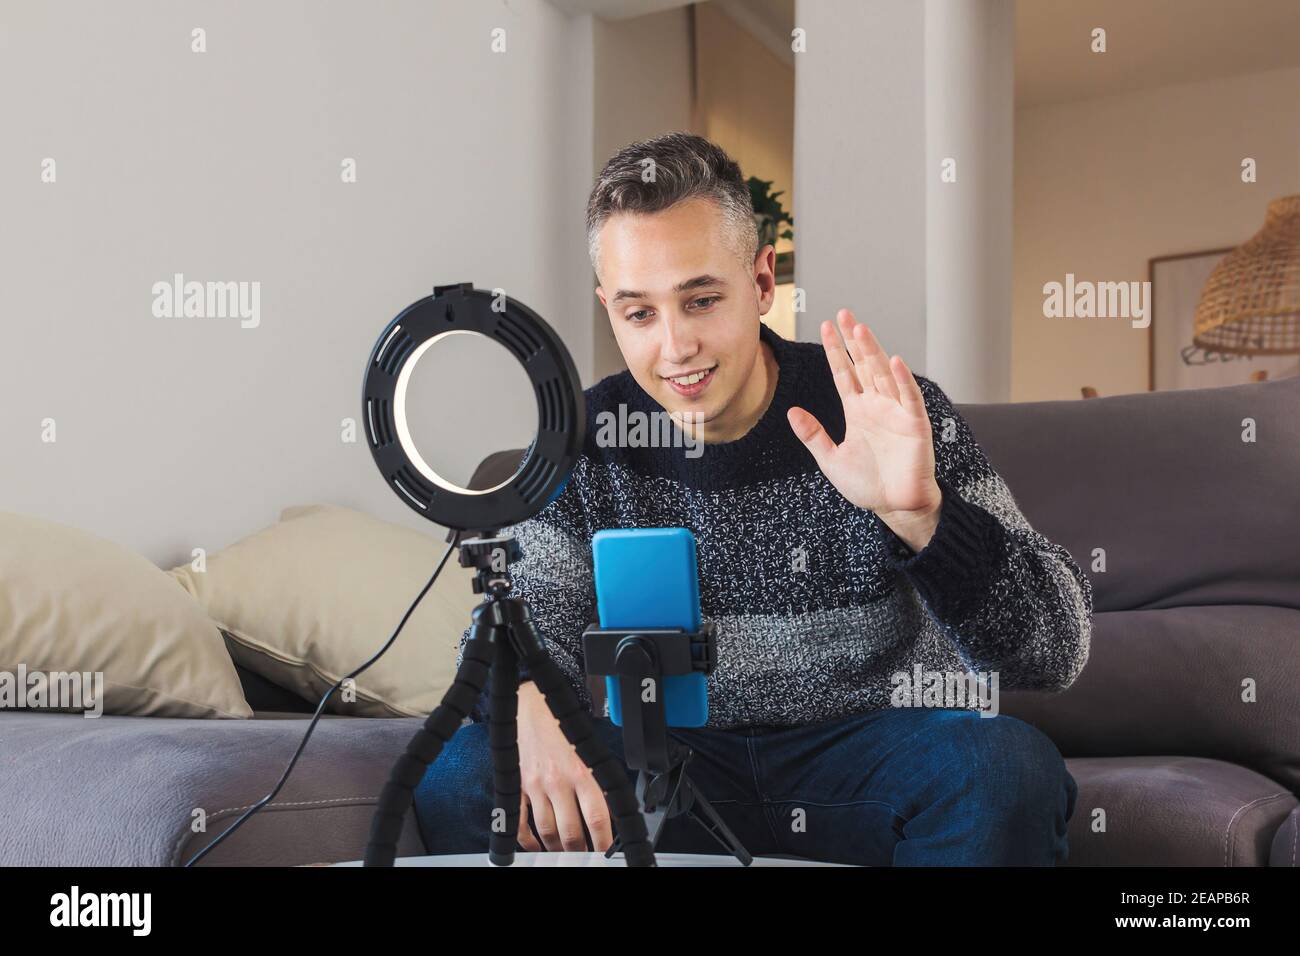 Stock photo of Young man millennial influencer sit on couch is vlogging, recording and creating online content with smartphone and lights. Social medi Stock Photo